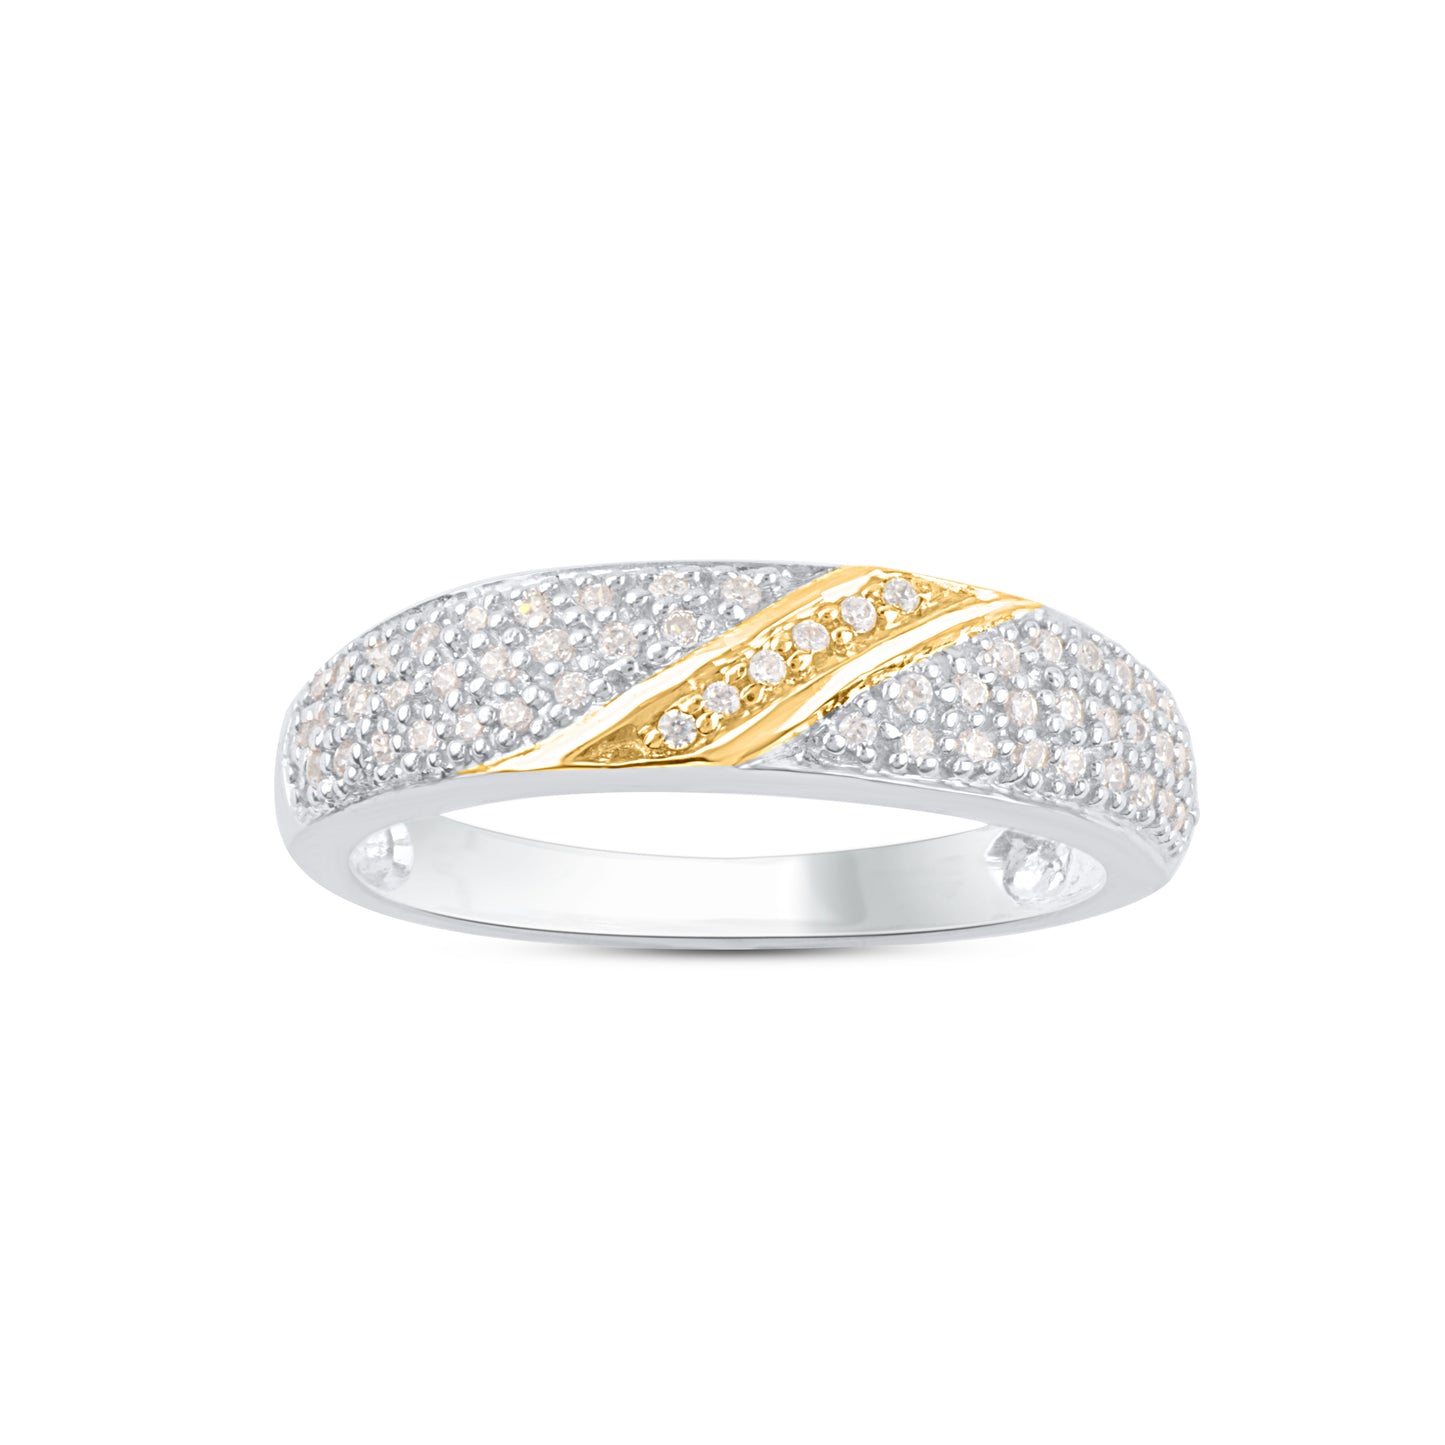 Half Eternity Engagement Band in Two Tone Gold Plated 925 Sterling Silver